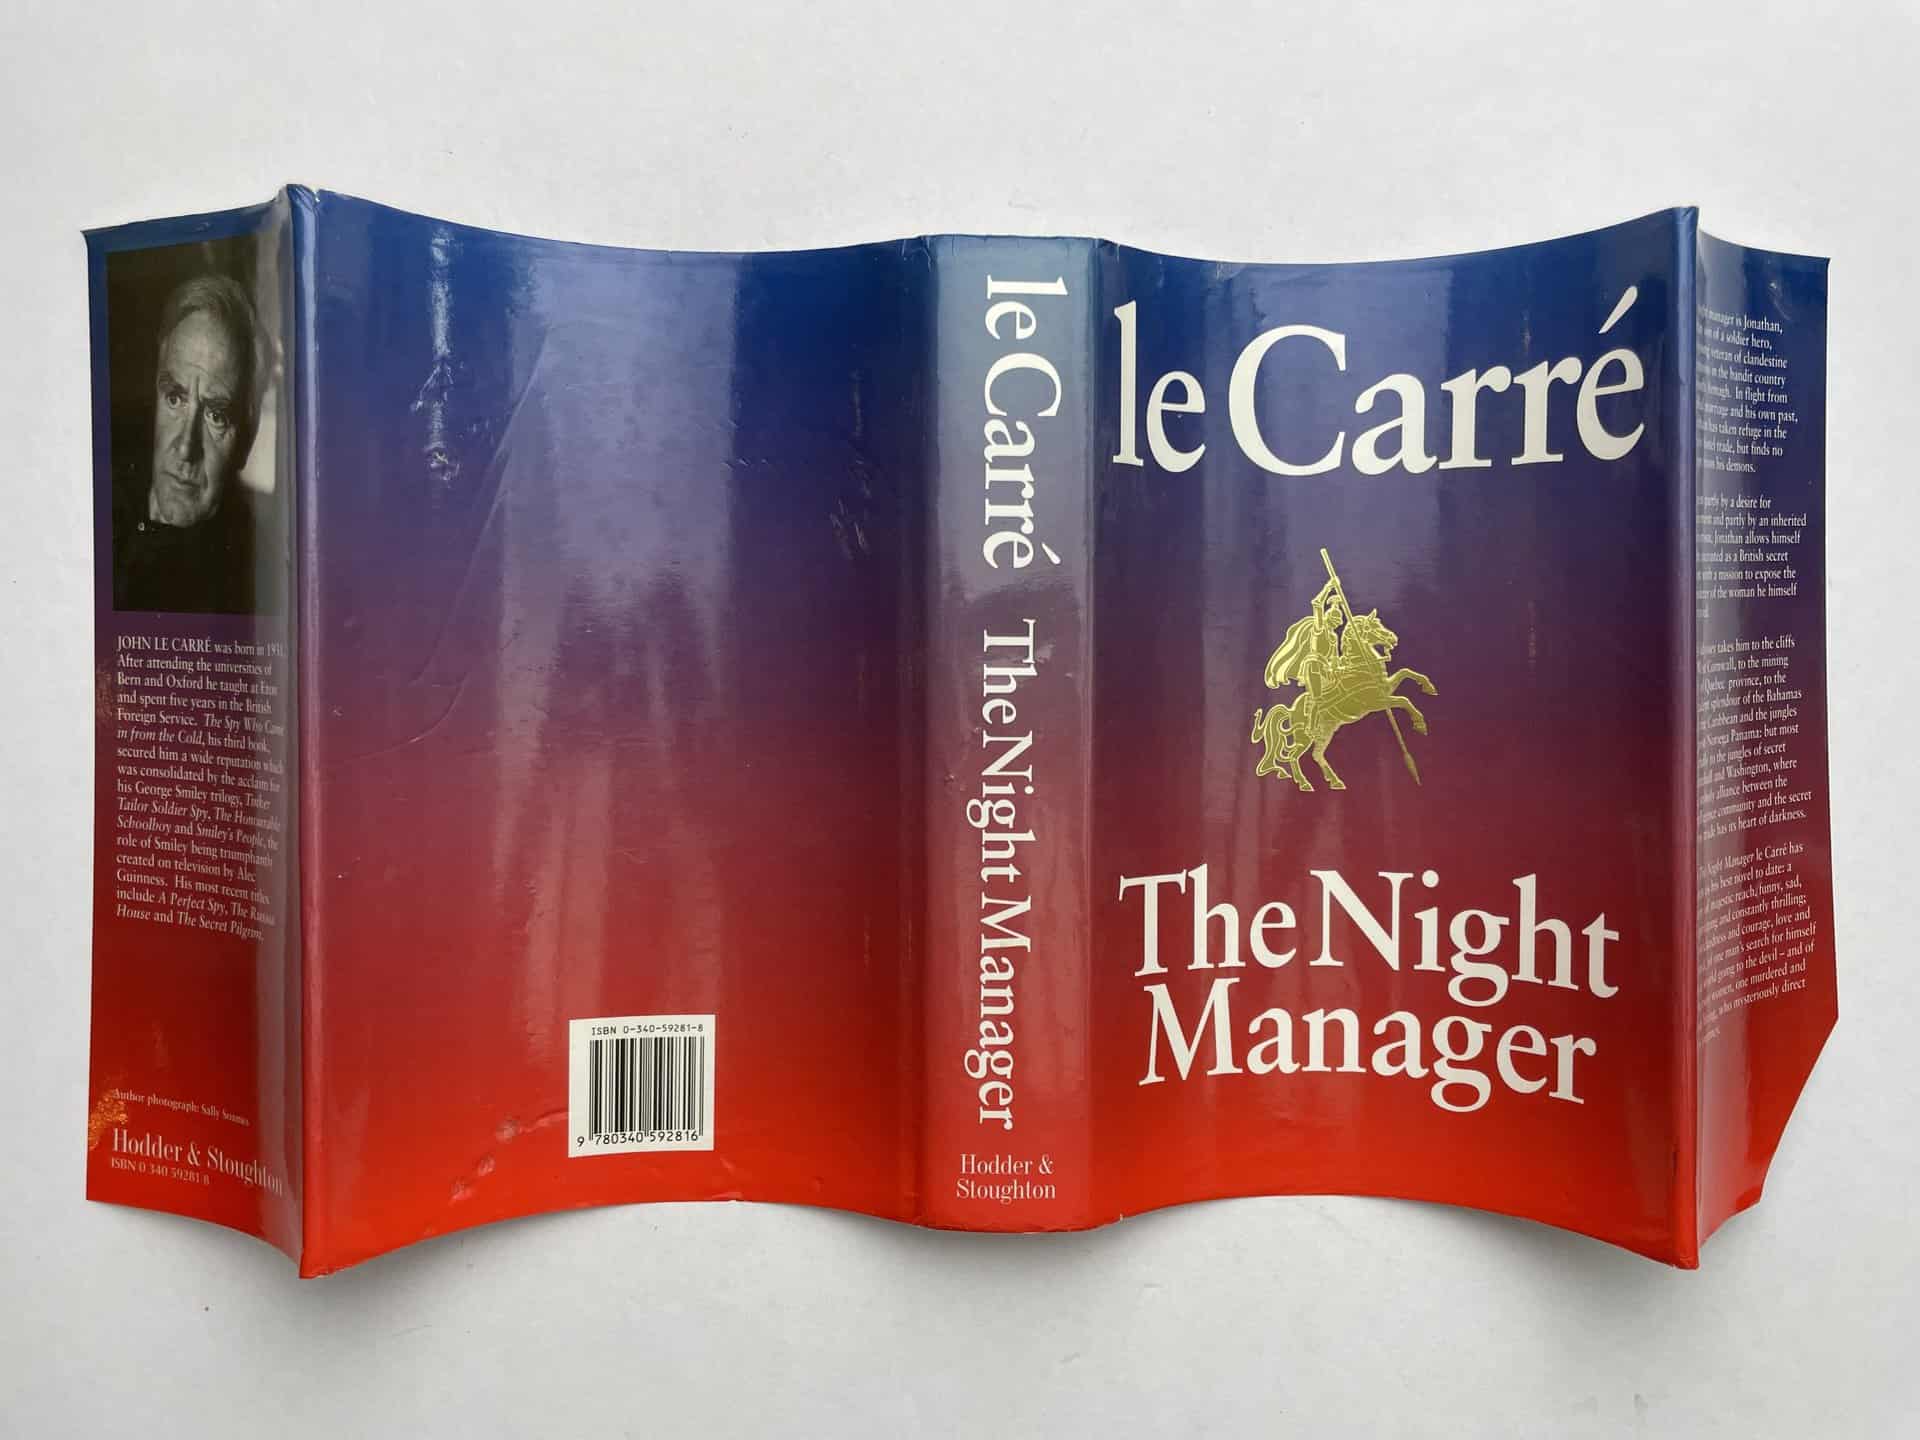 john le carre the night manager first4